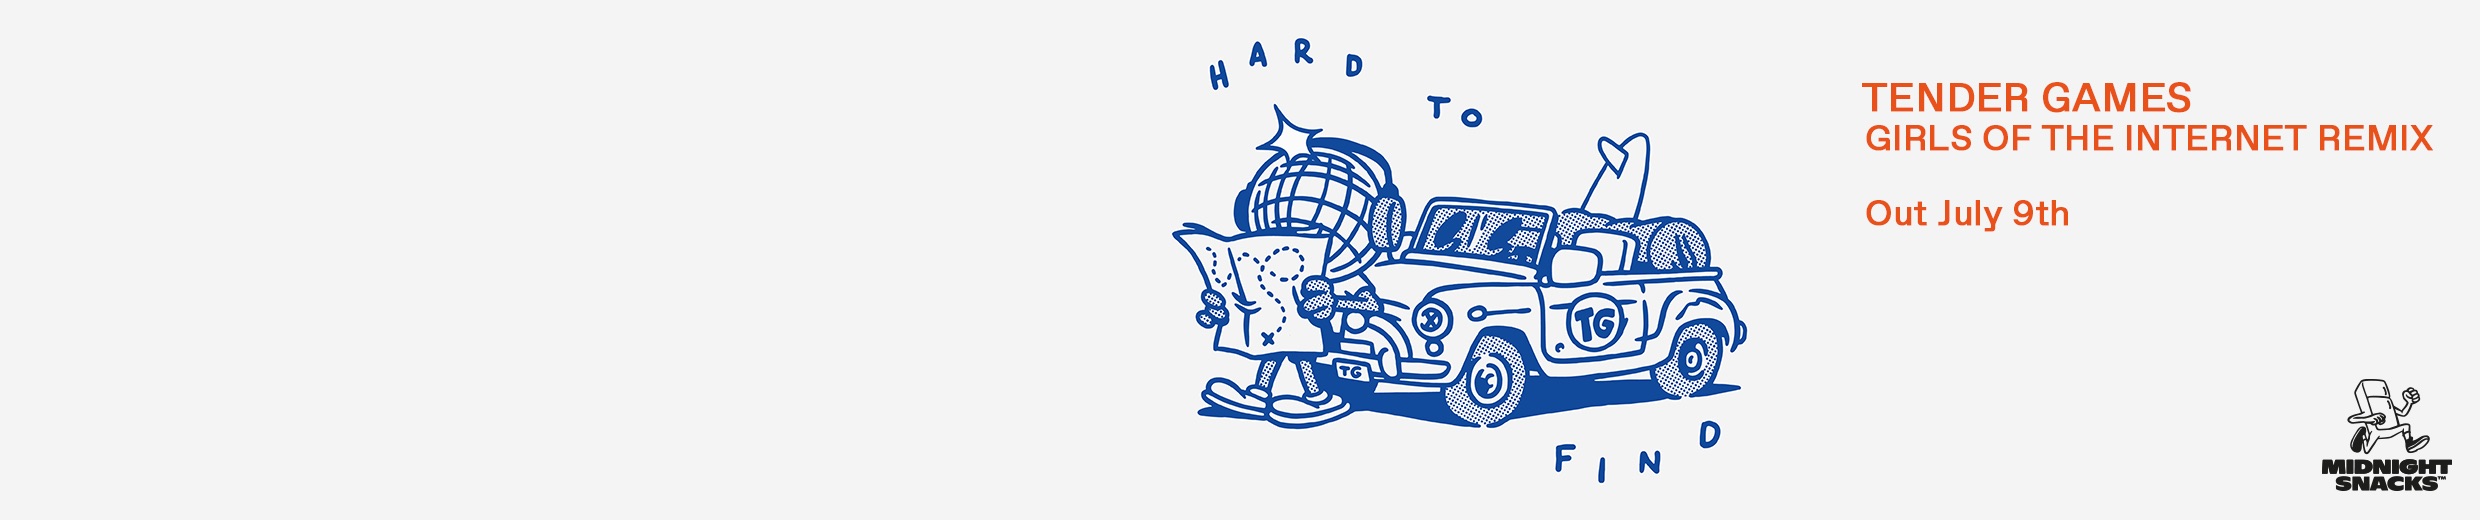 Stream Tender Games - Hard To Find by Midnight Snacks